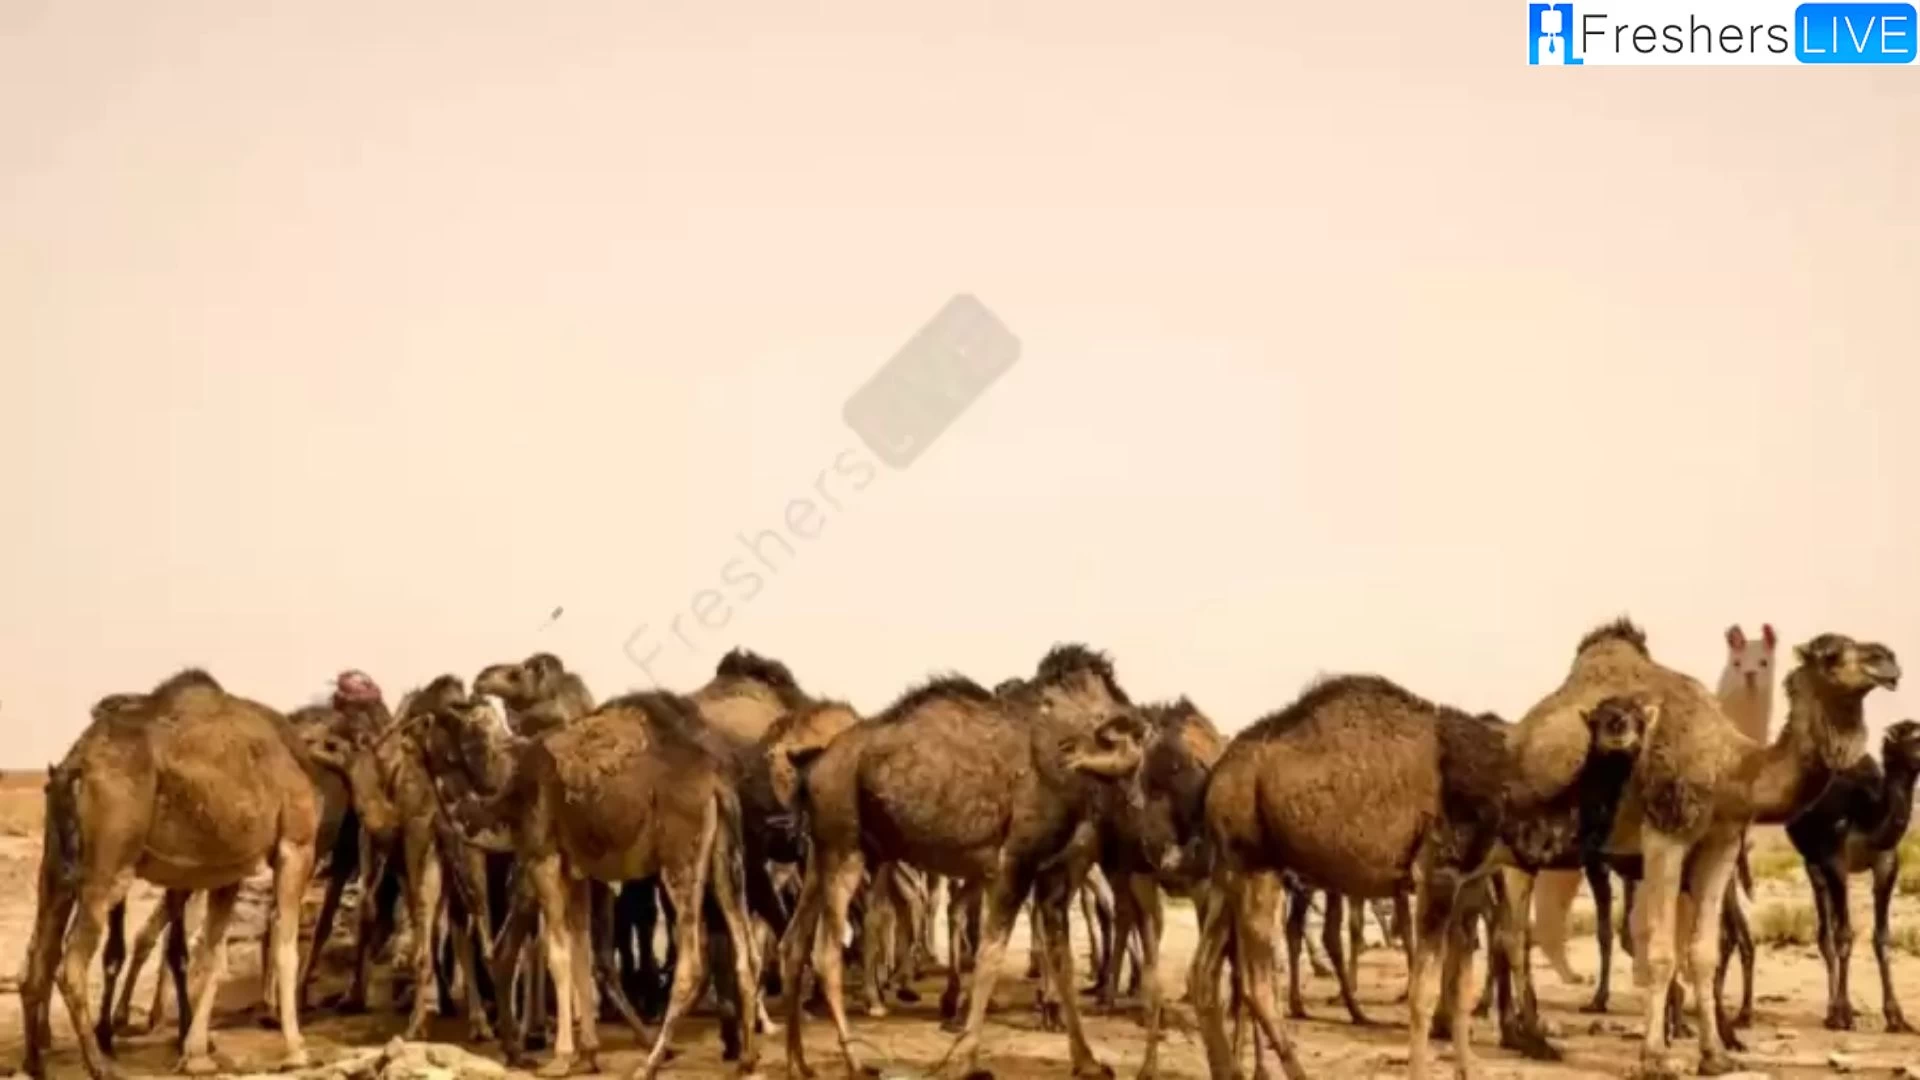 Only A Human With 360 Vision Can Spot The Flame Between These Camels In This Picture?